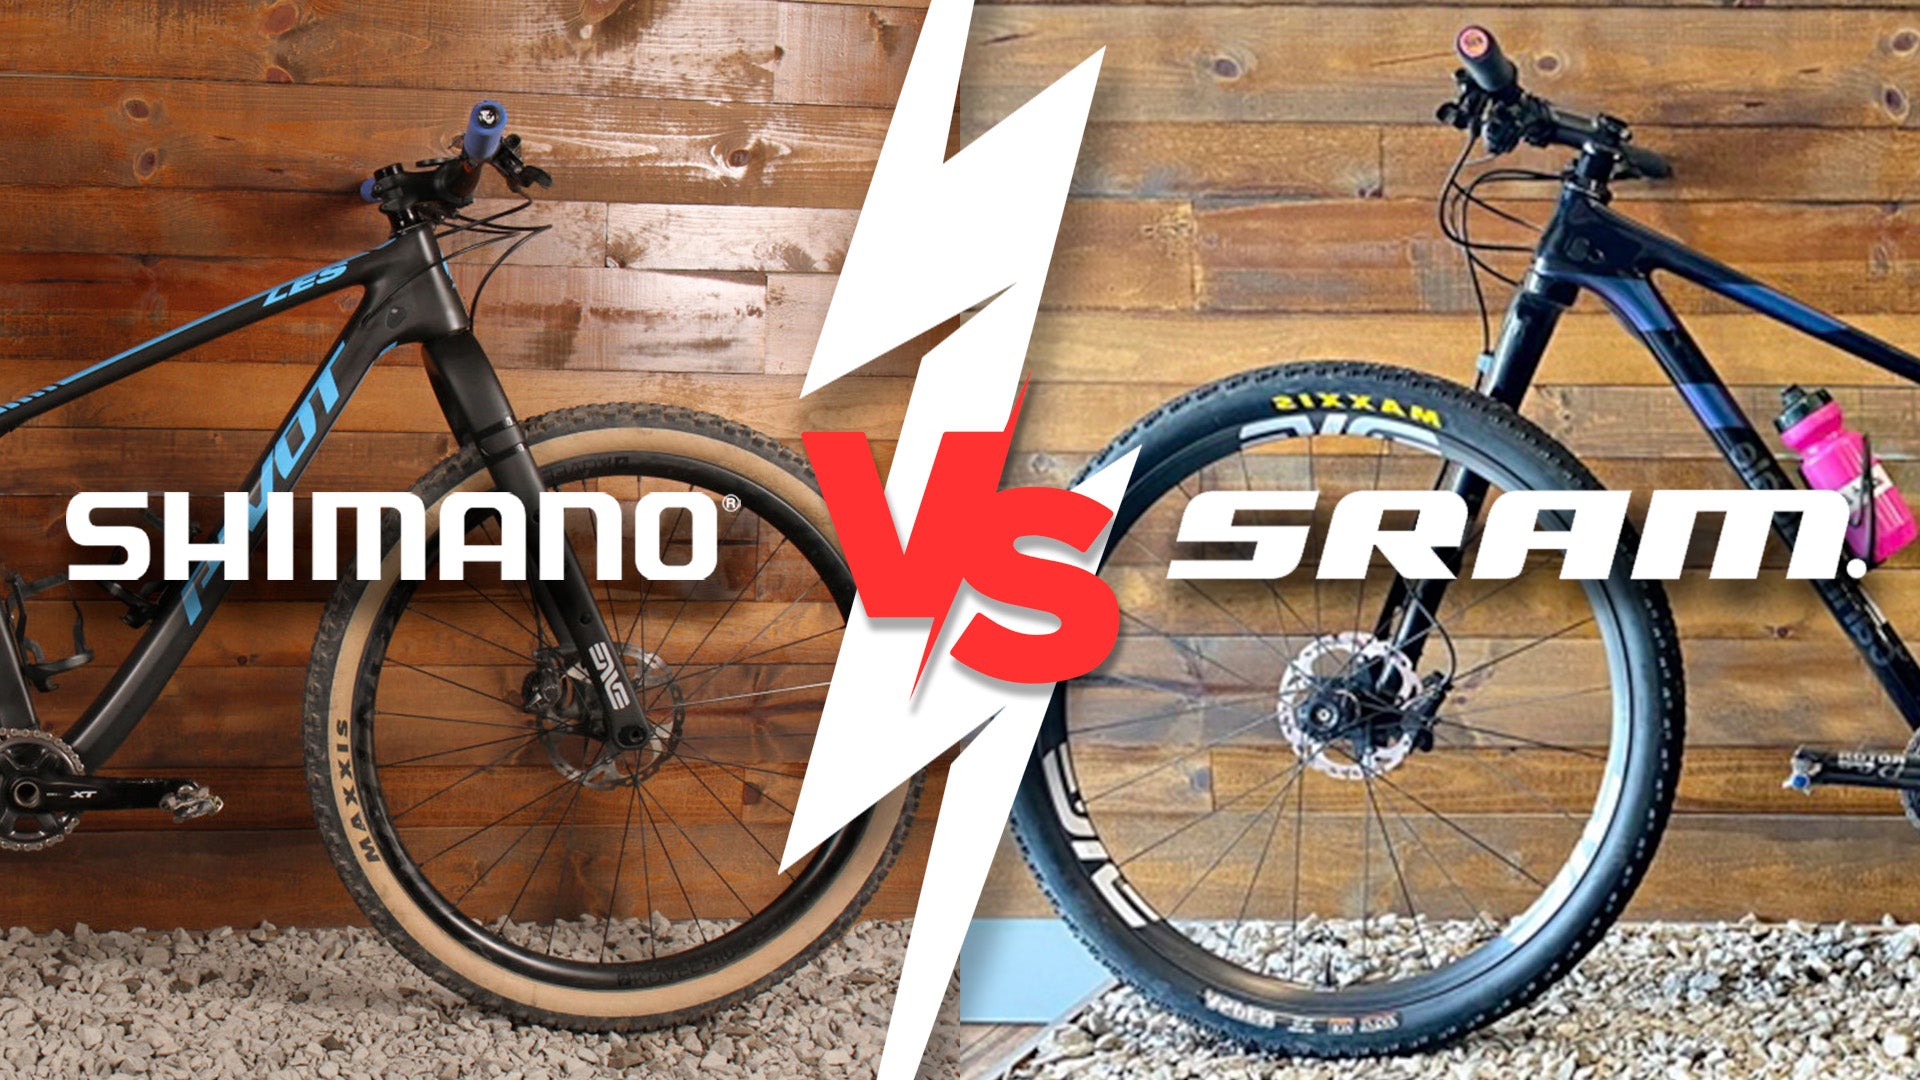 SRAM vs Shimano MTB Brakes: Which is Best?